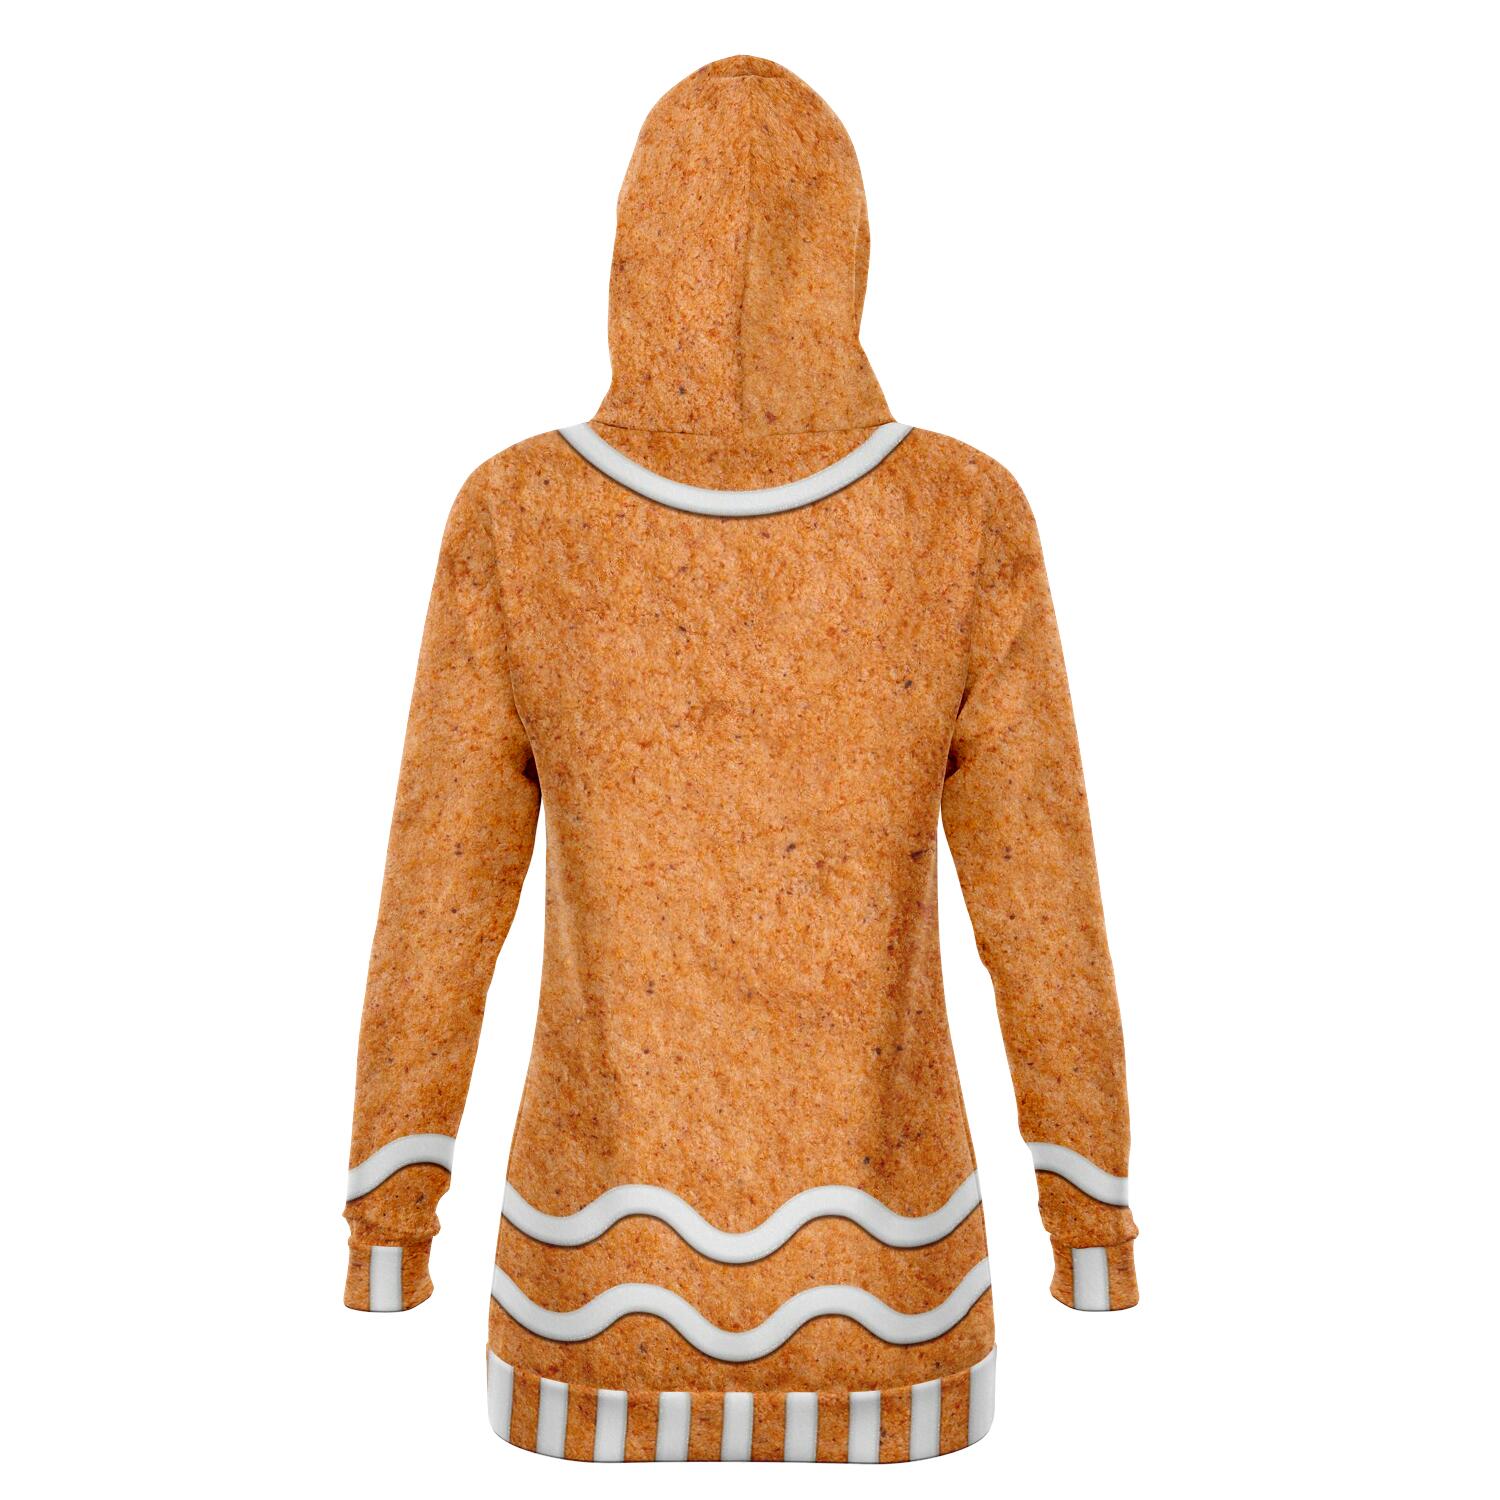 Gingerbread Women's Hoodie Order By December 5 - Powderaddicts